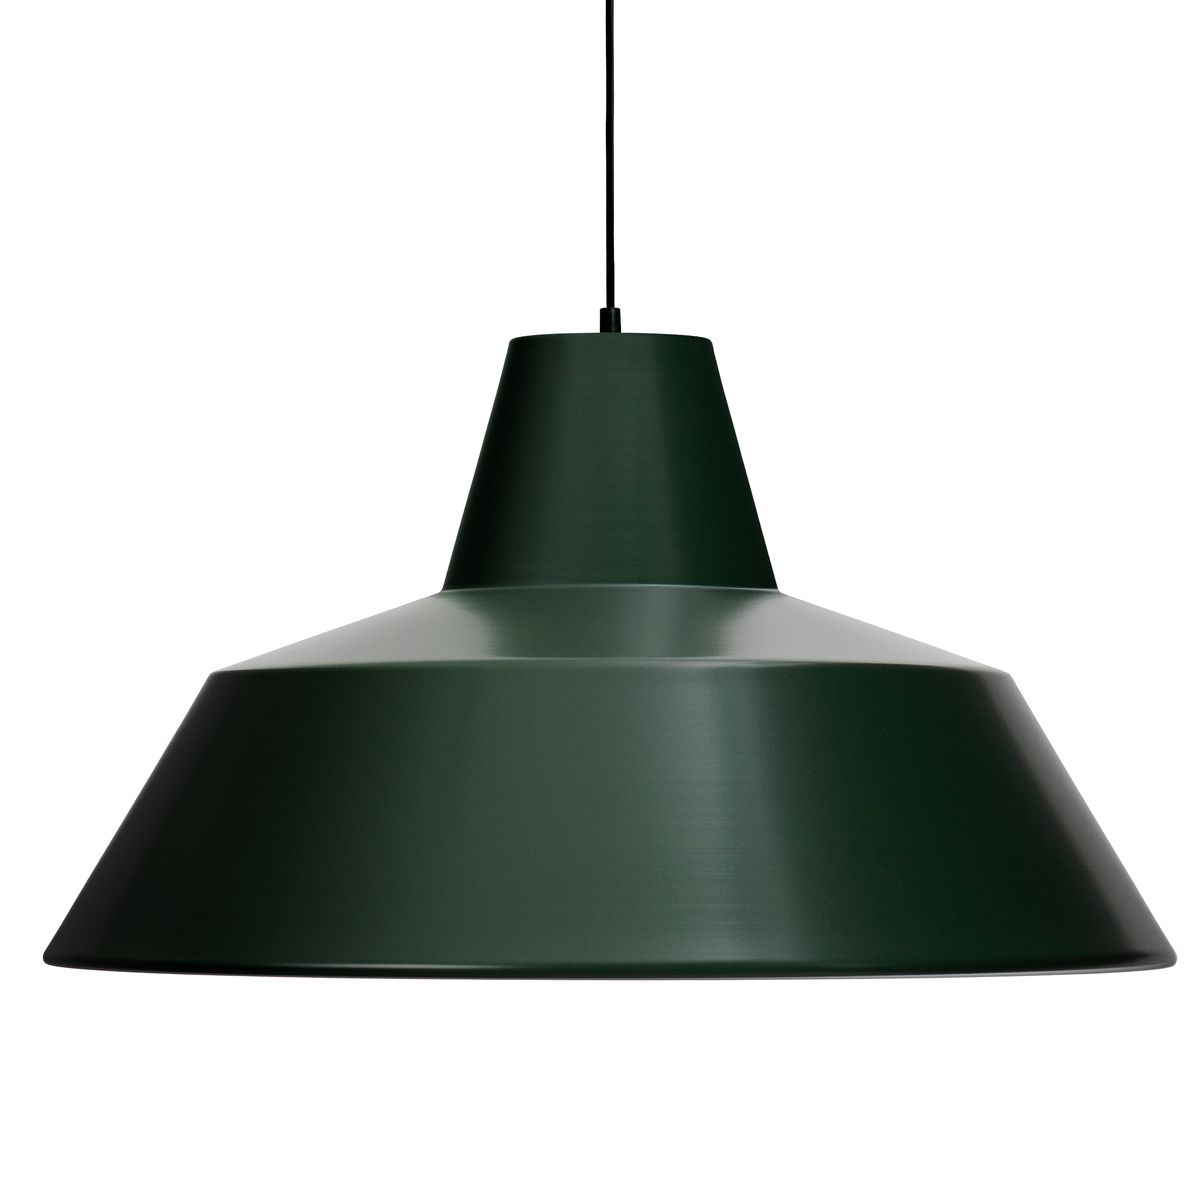 Made by Hand, Workshop Pendant Lamp W5, Racing Green, Pendant,